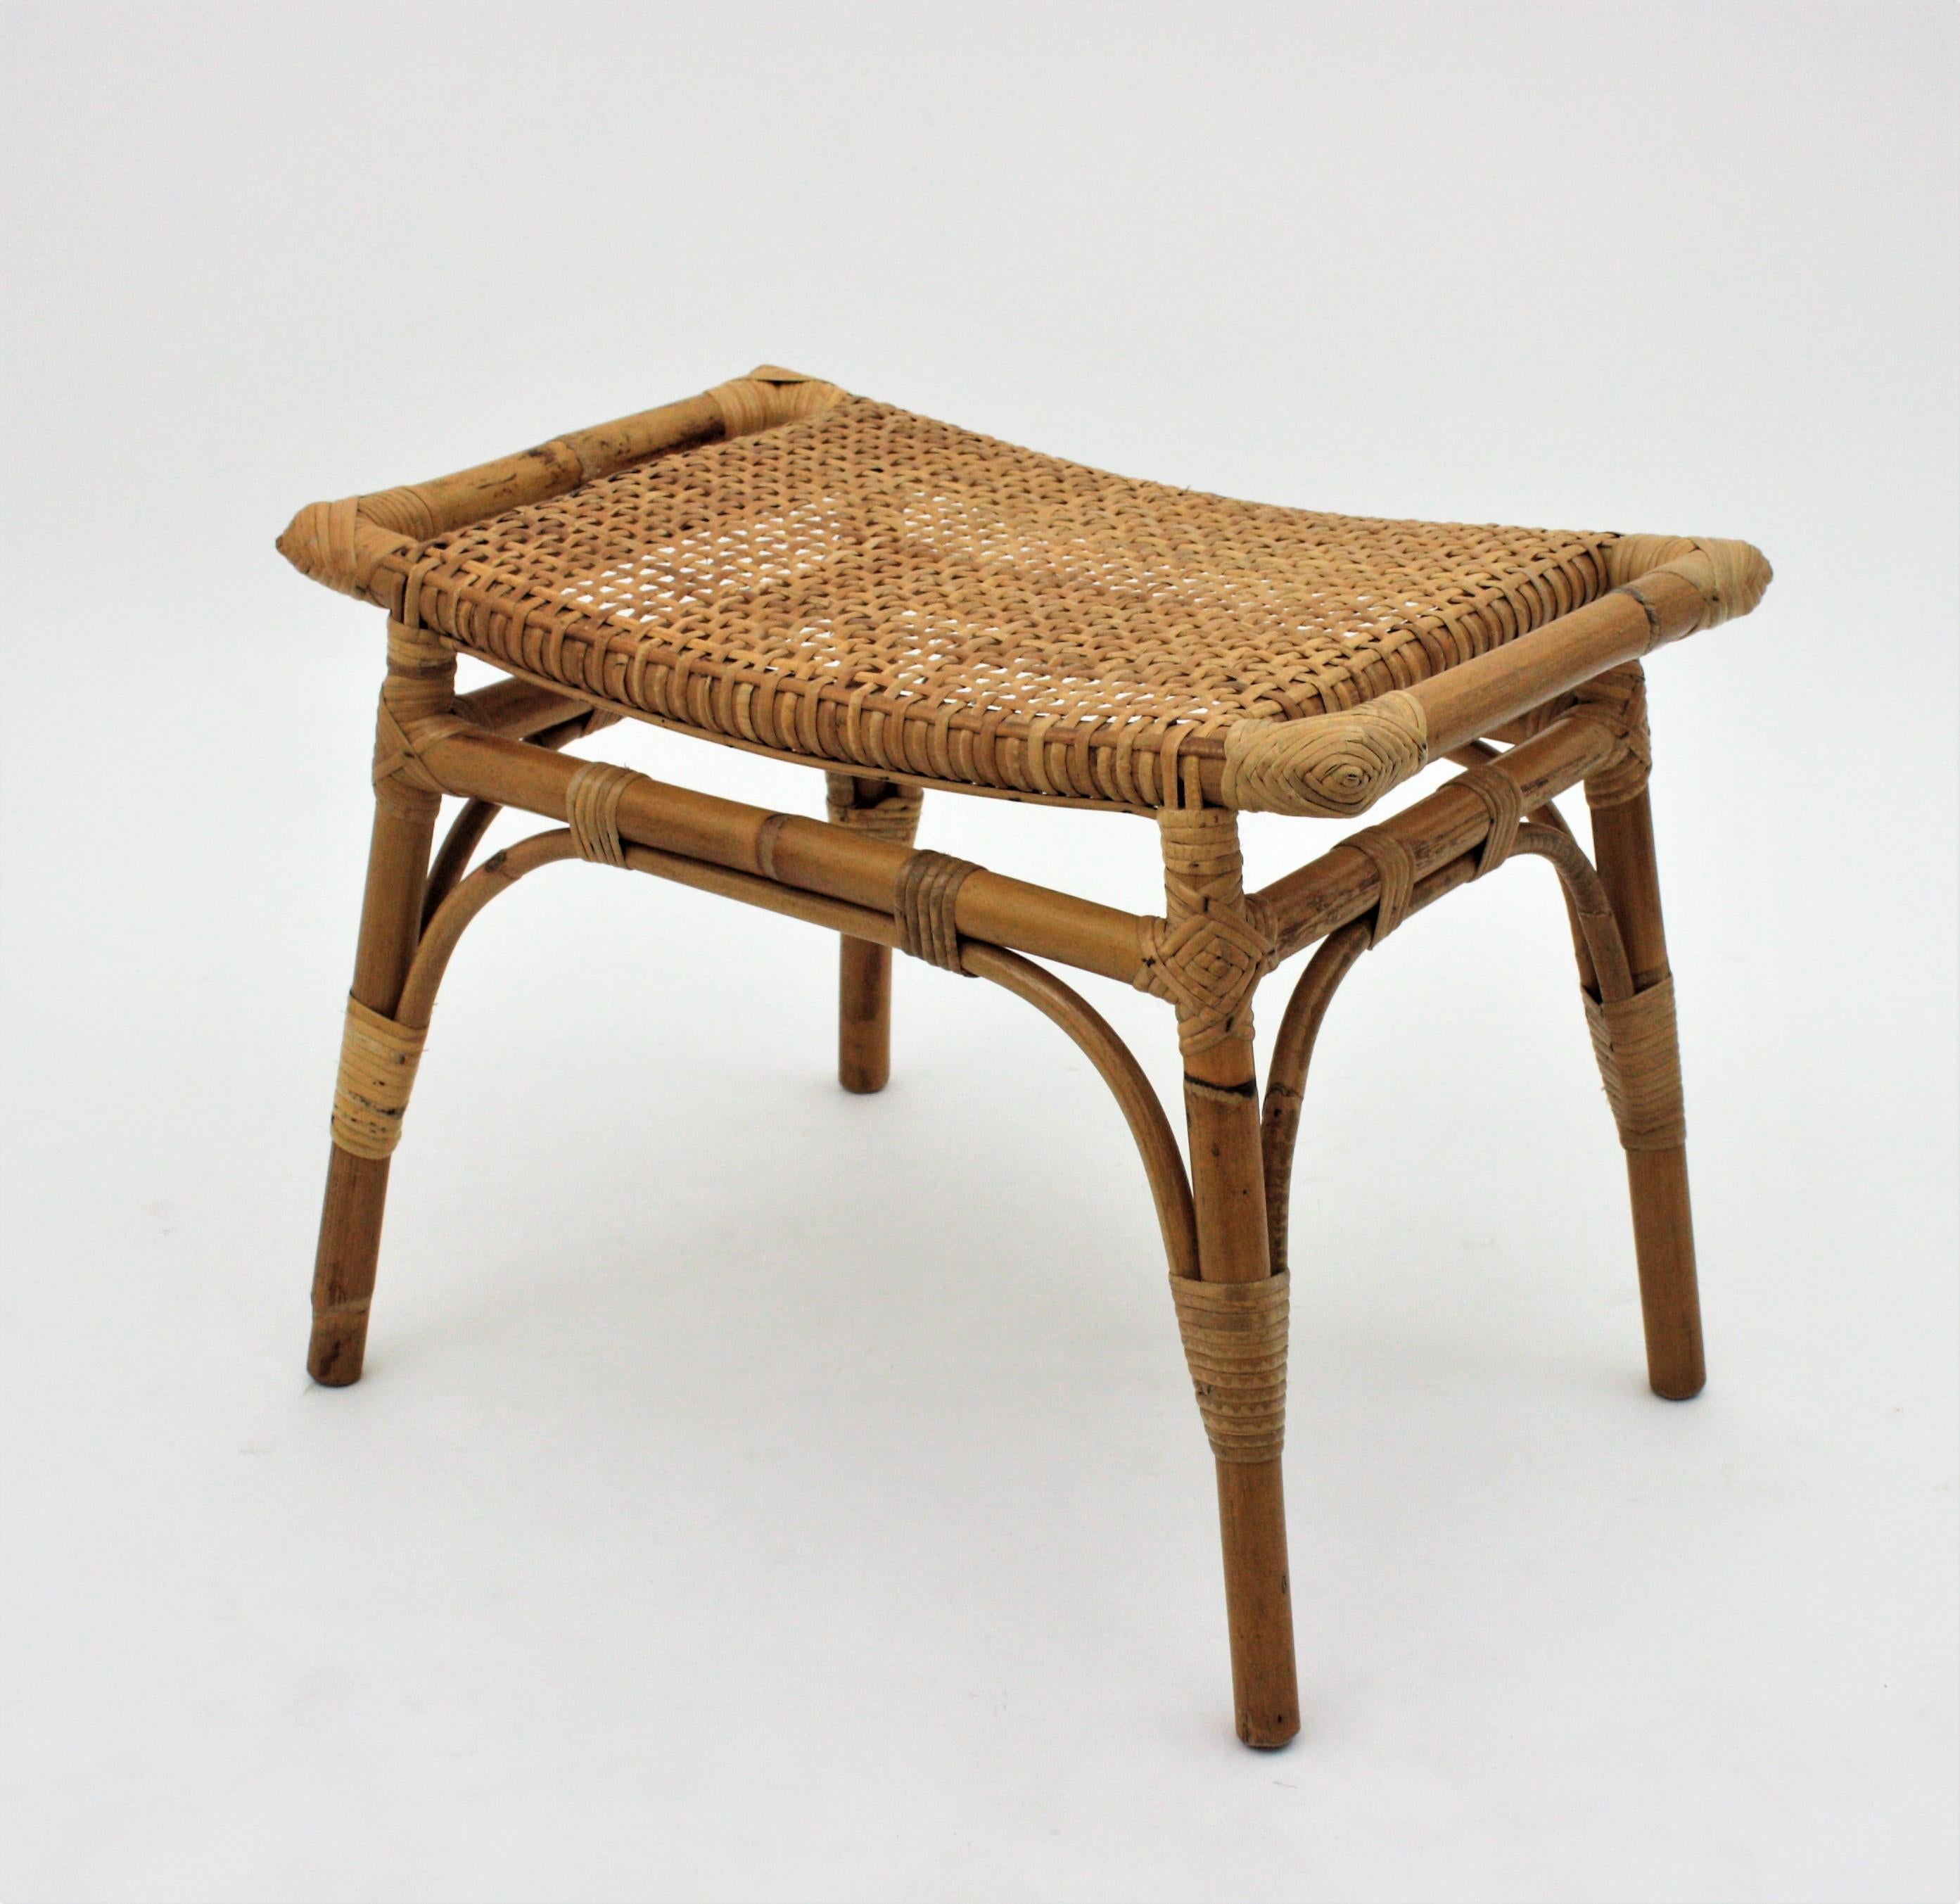 Pair of Bamboo Stools, Benches or Ottoman with Woven Wicker Cane Seats 2